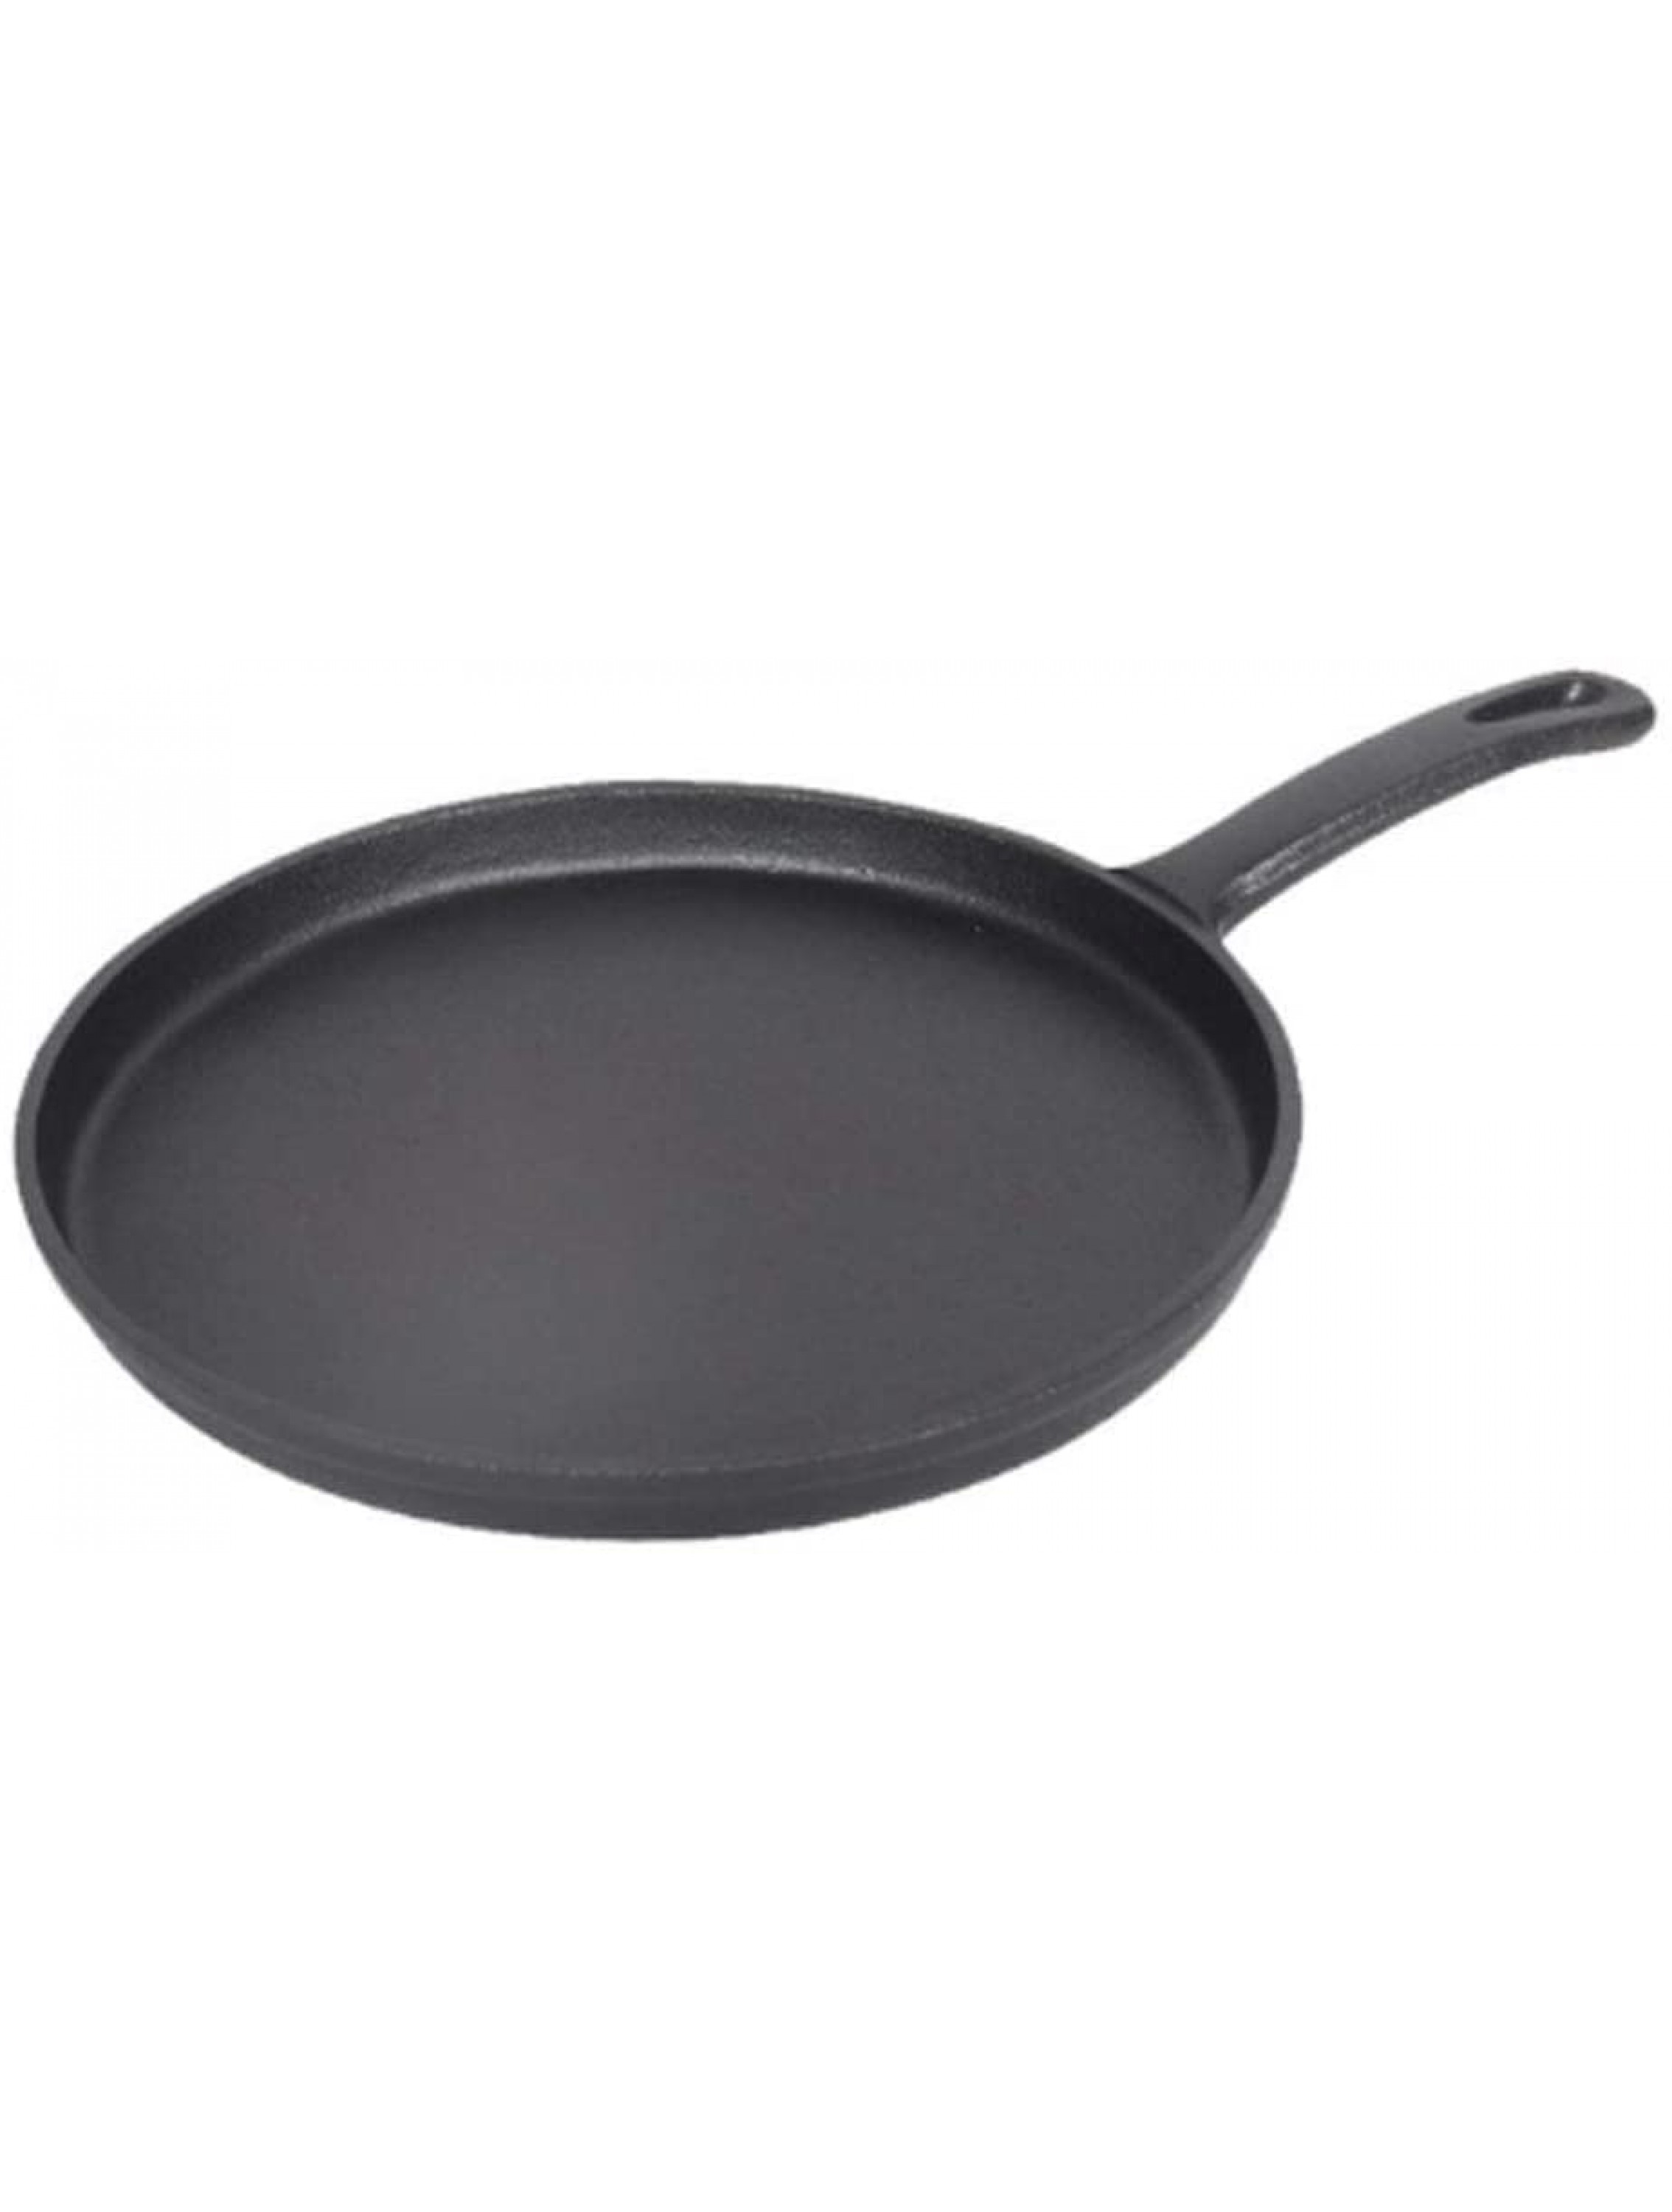 ZLYPSW 26cm Thickened Cast Iron Non-stick Frying Pan Layer-cake Cake Pancake Crepe Maker Flat Pan Griddle Breakfast Omelet Baking Pans - BZ24GIP3E